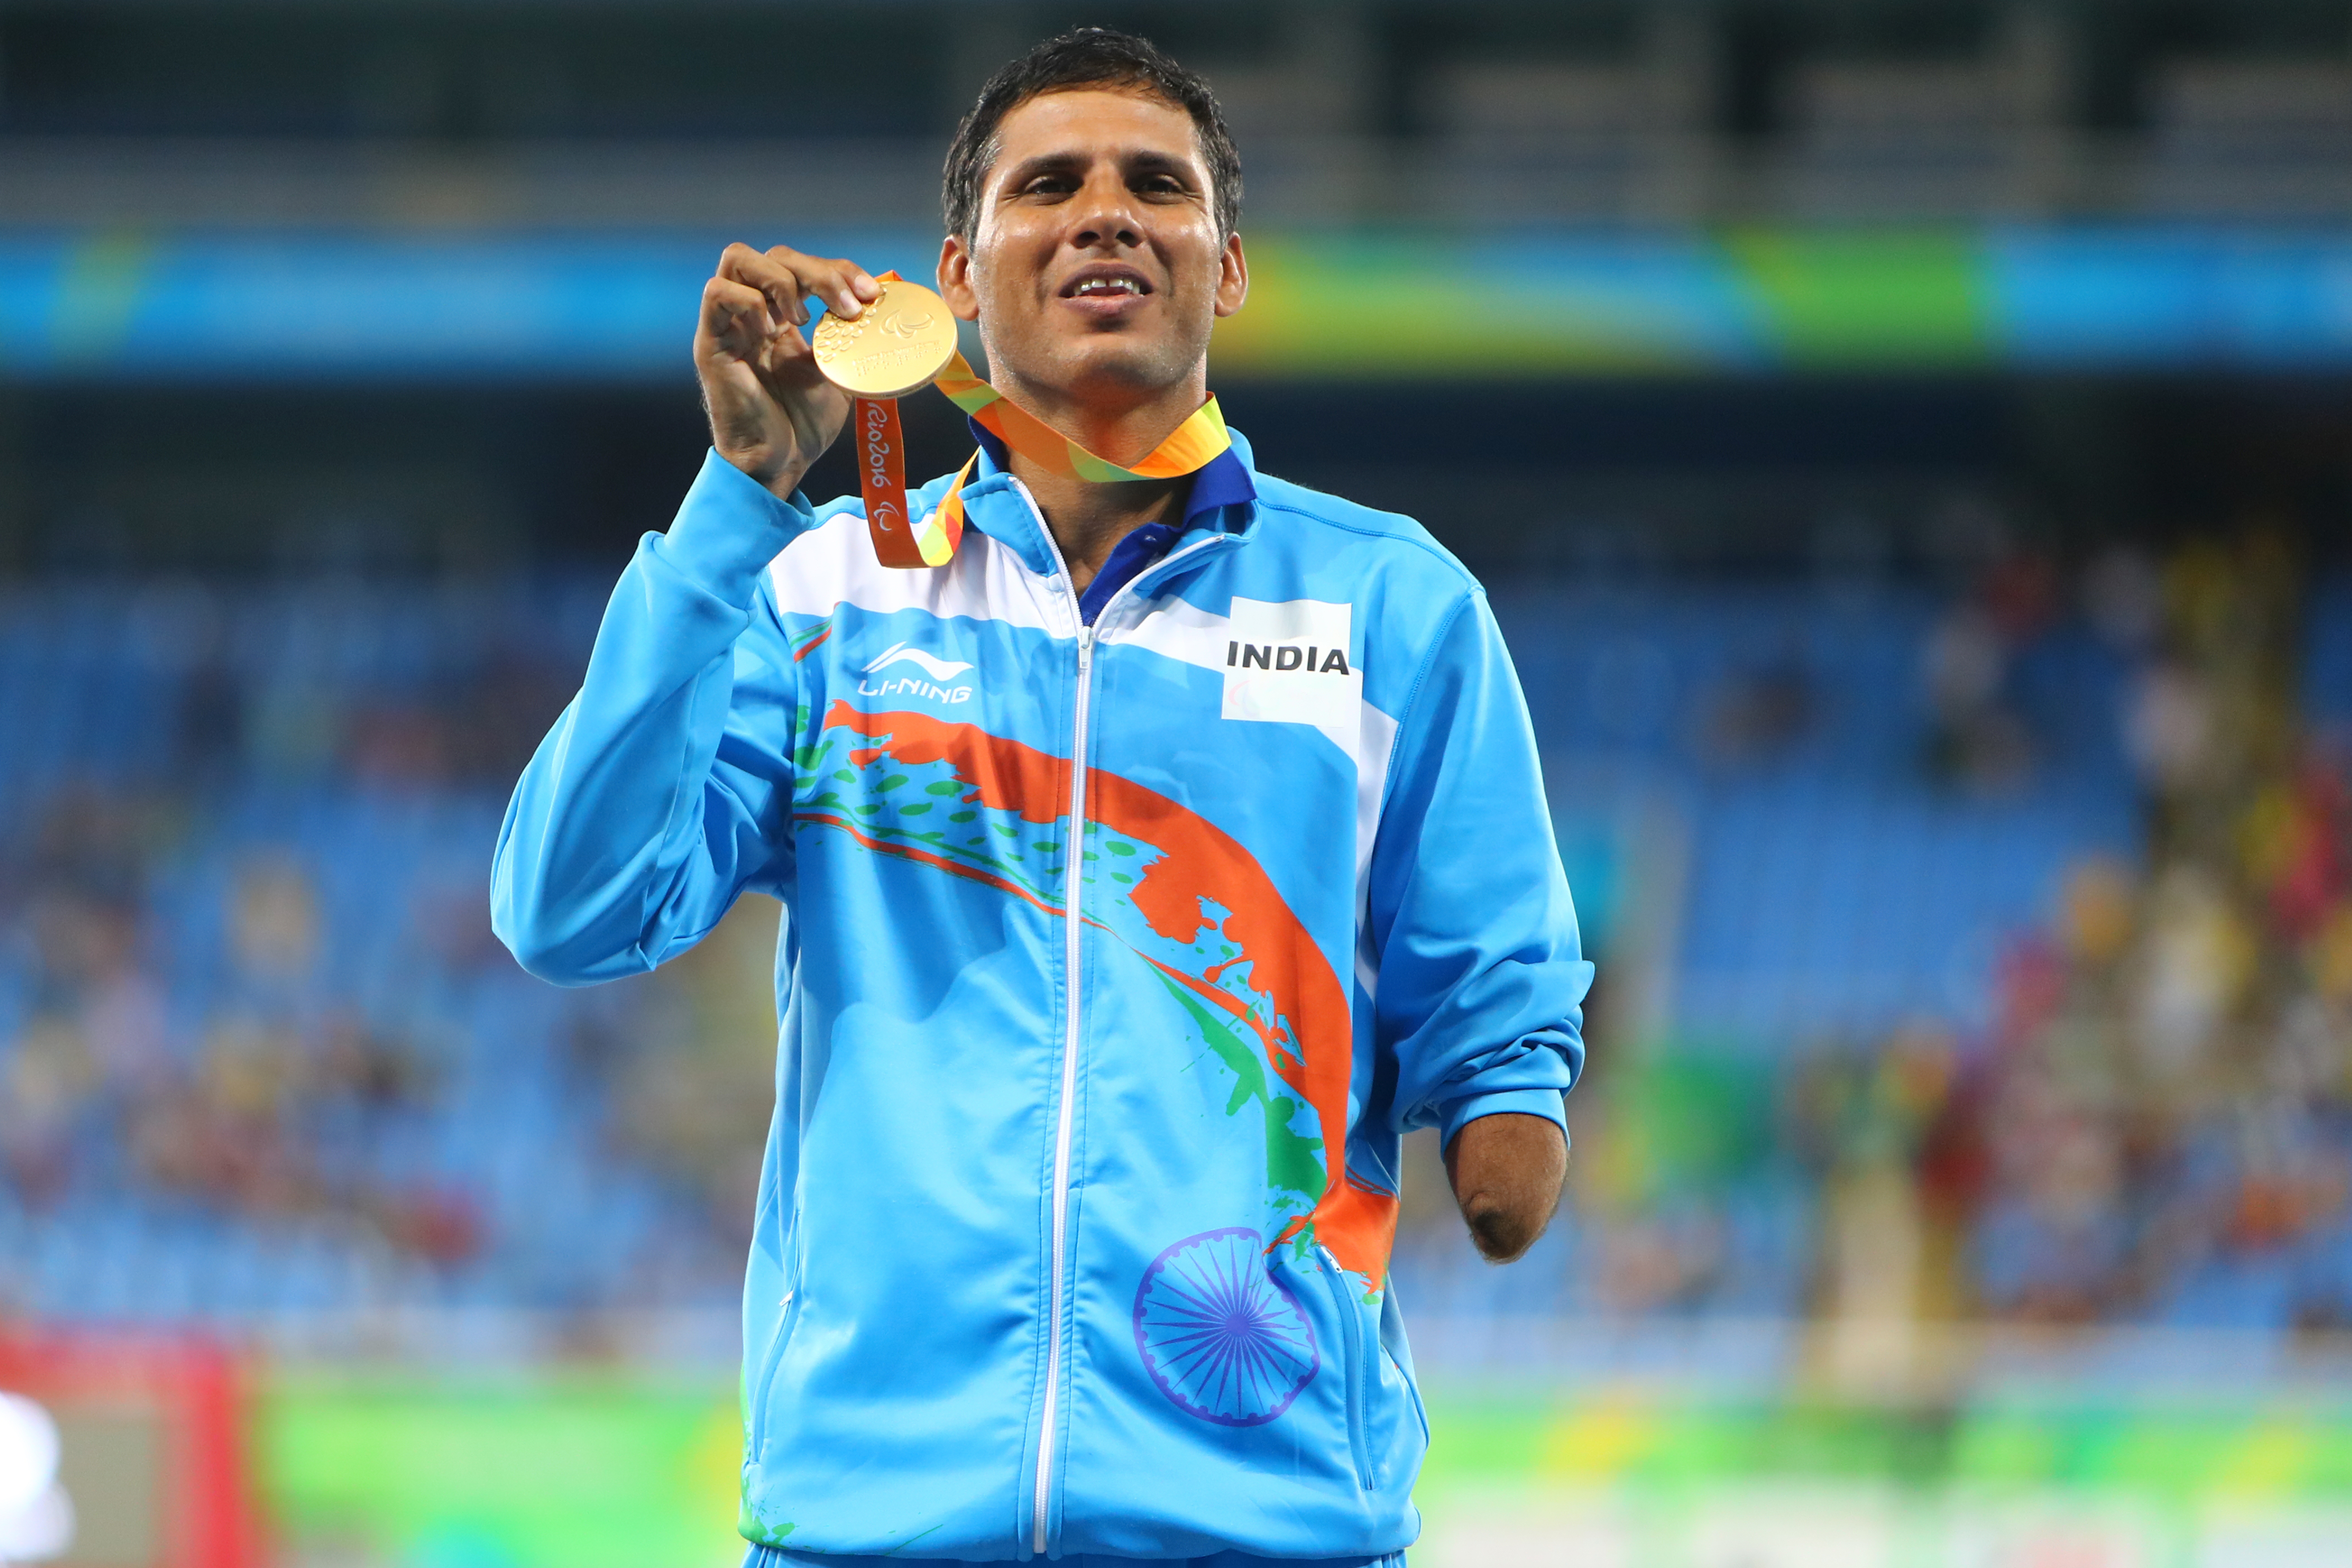 Paralympics Gold winner Jhajharia : Getting another gold after a 12-year long wait only sweetens the feeling more